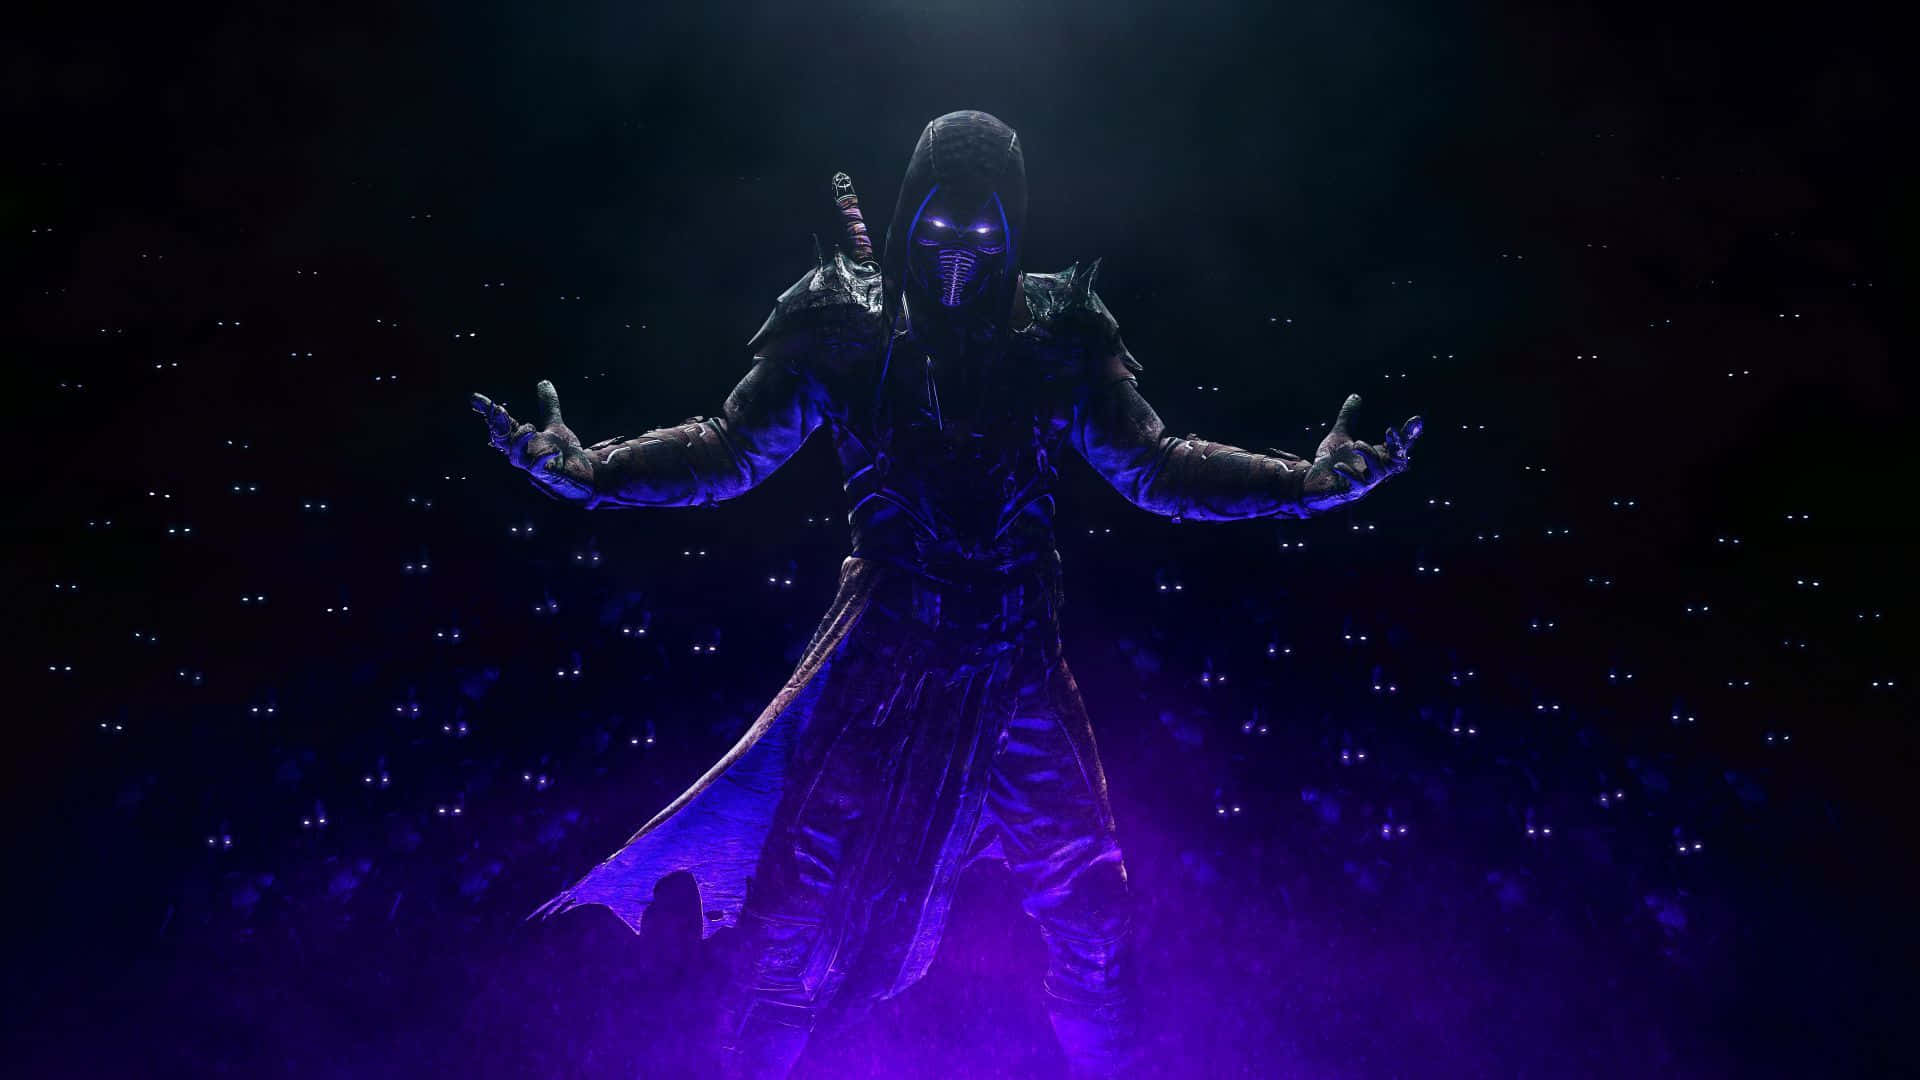 The Ultimate Deadly Warrior - Noob Saibot Wallpaper